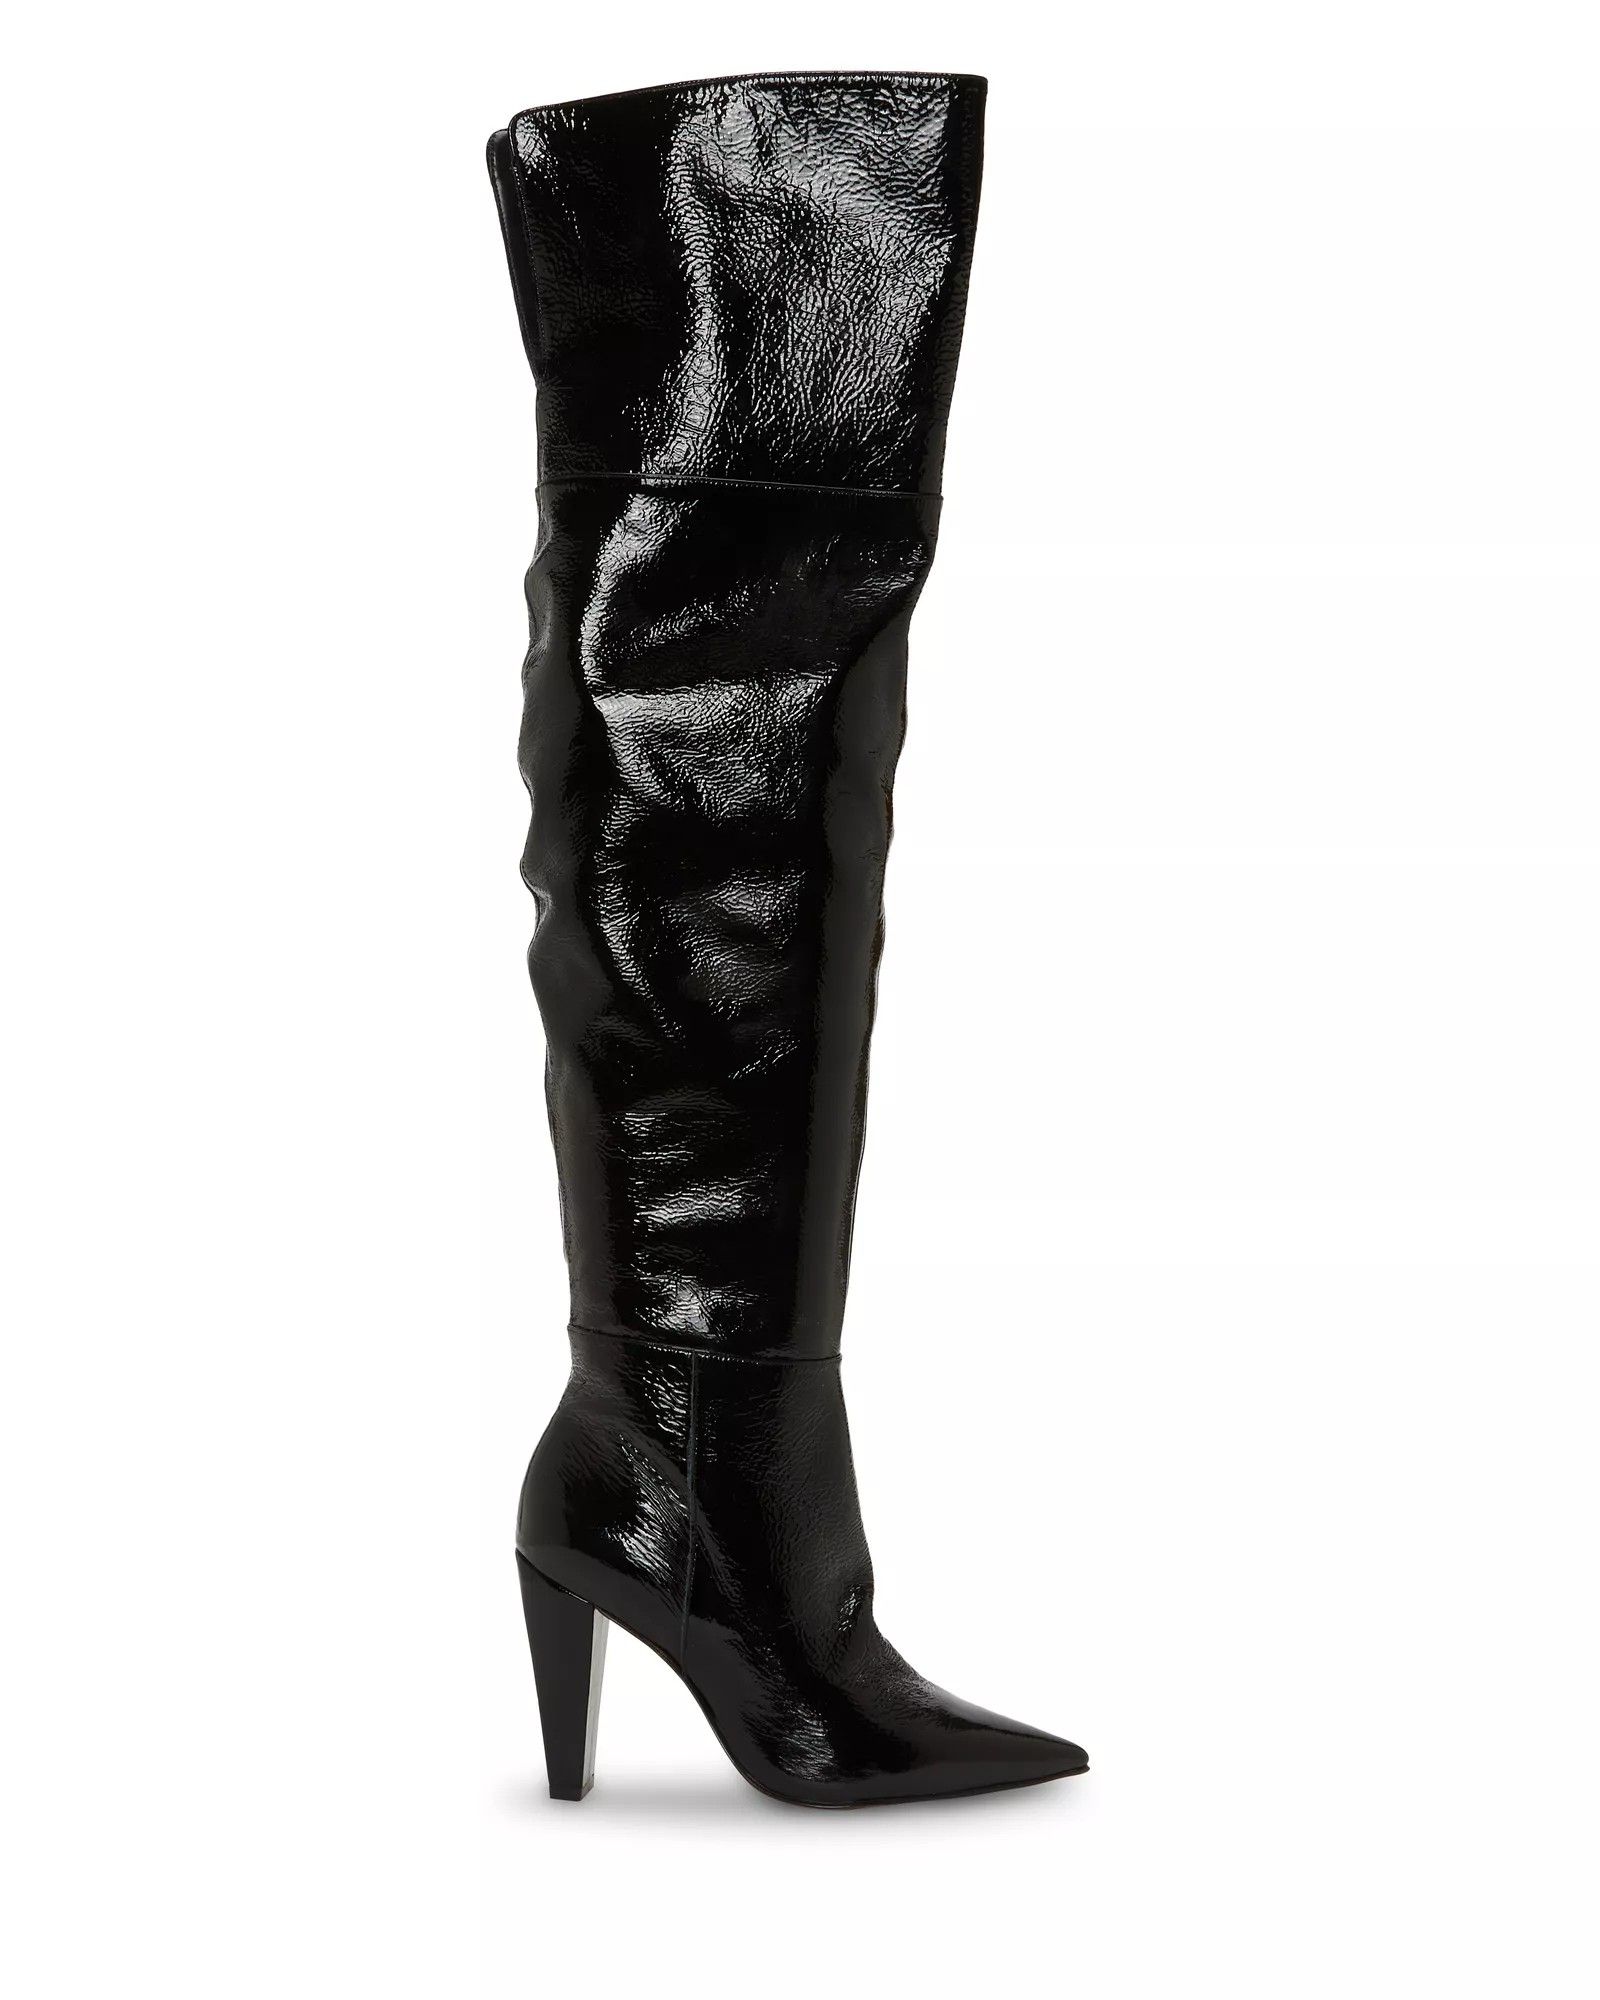 Vince Camuto Minnada Over-the-Knee Boot | Vince Camuto